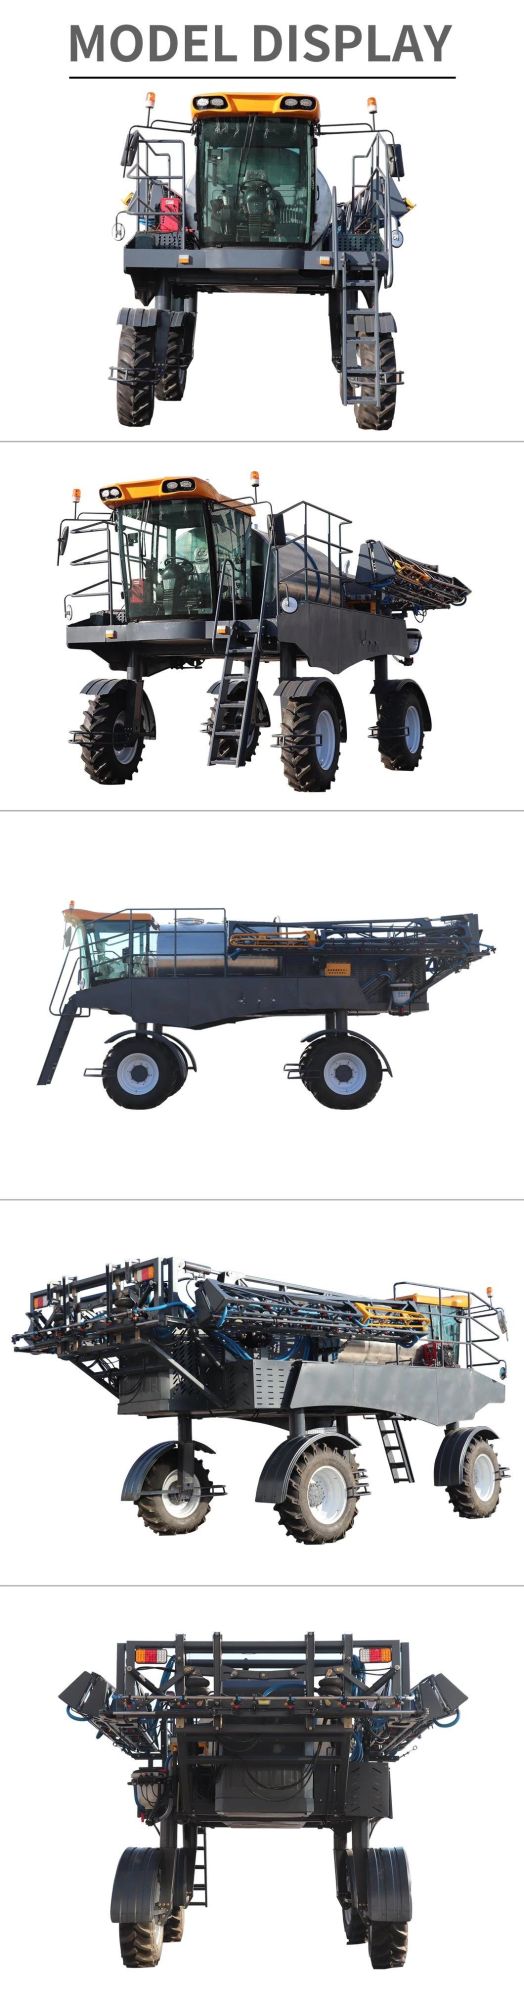 Agricultural Boom Cotton Motorized Equipment Implement Garden Tool Hydraulic Folding Farm Machinery Sprayer